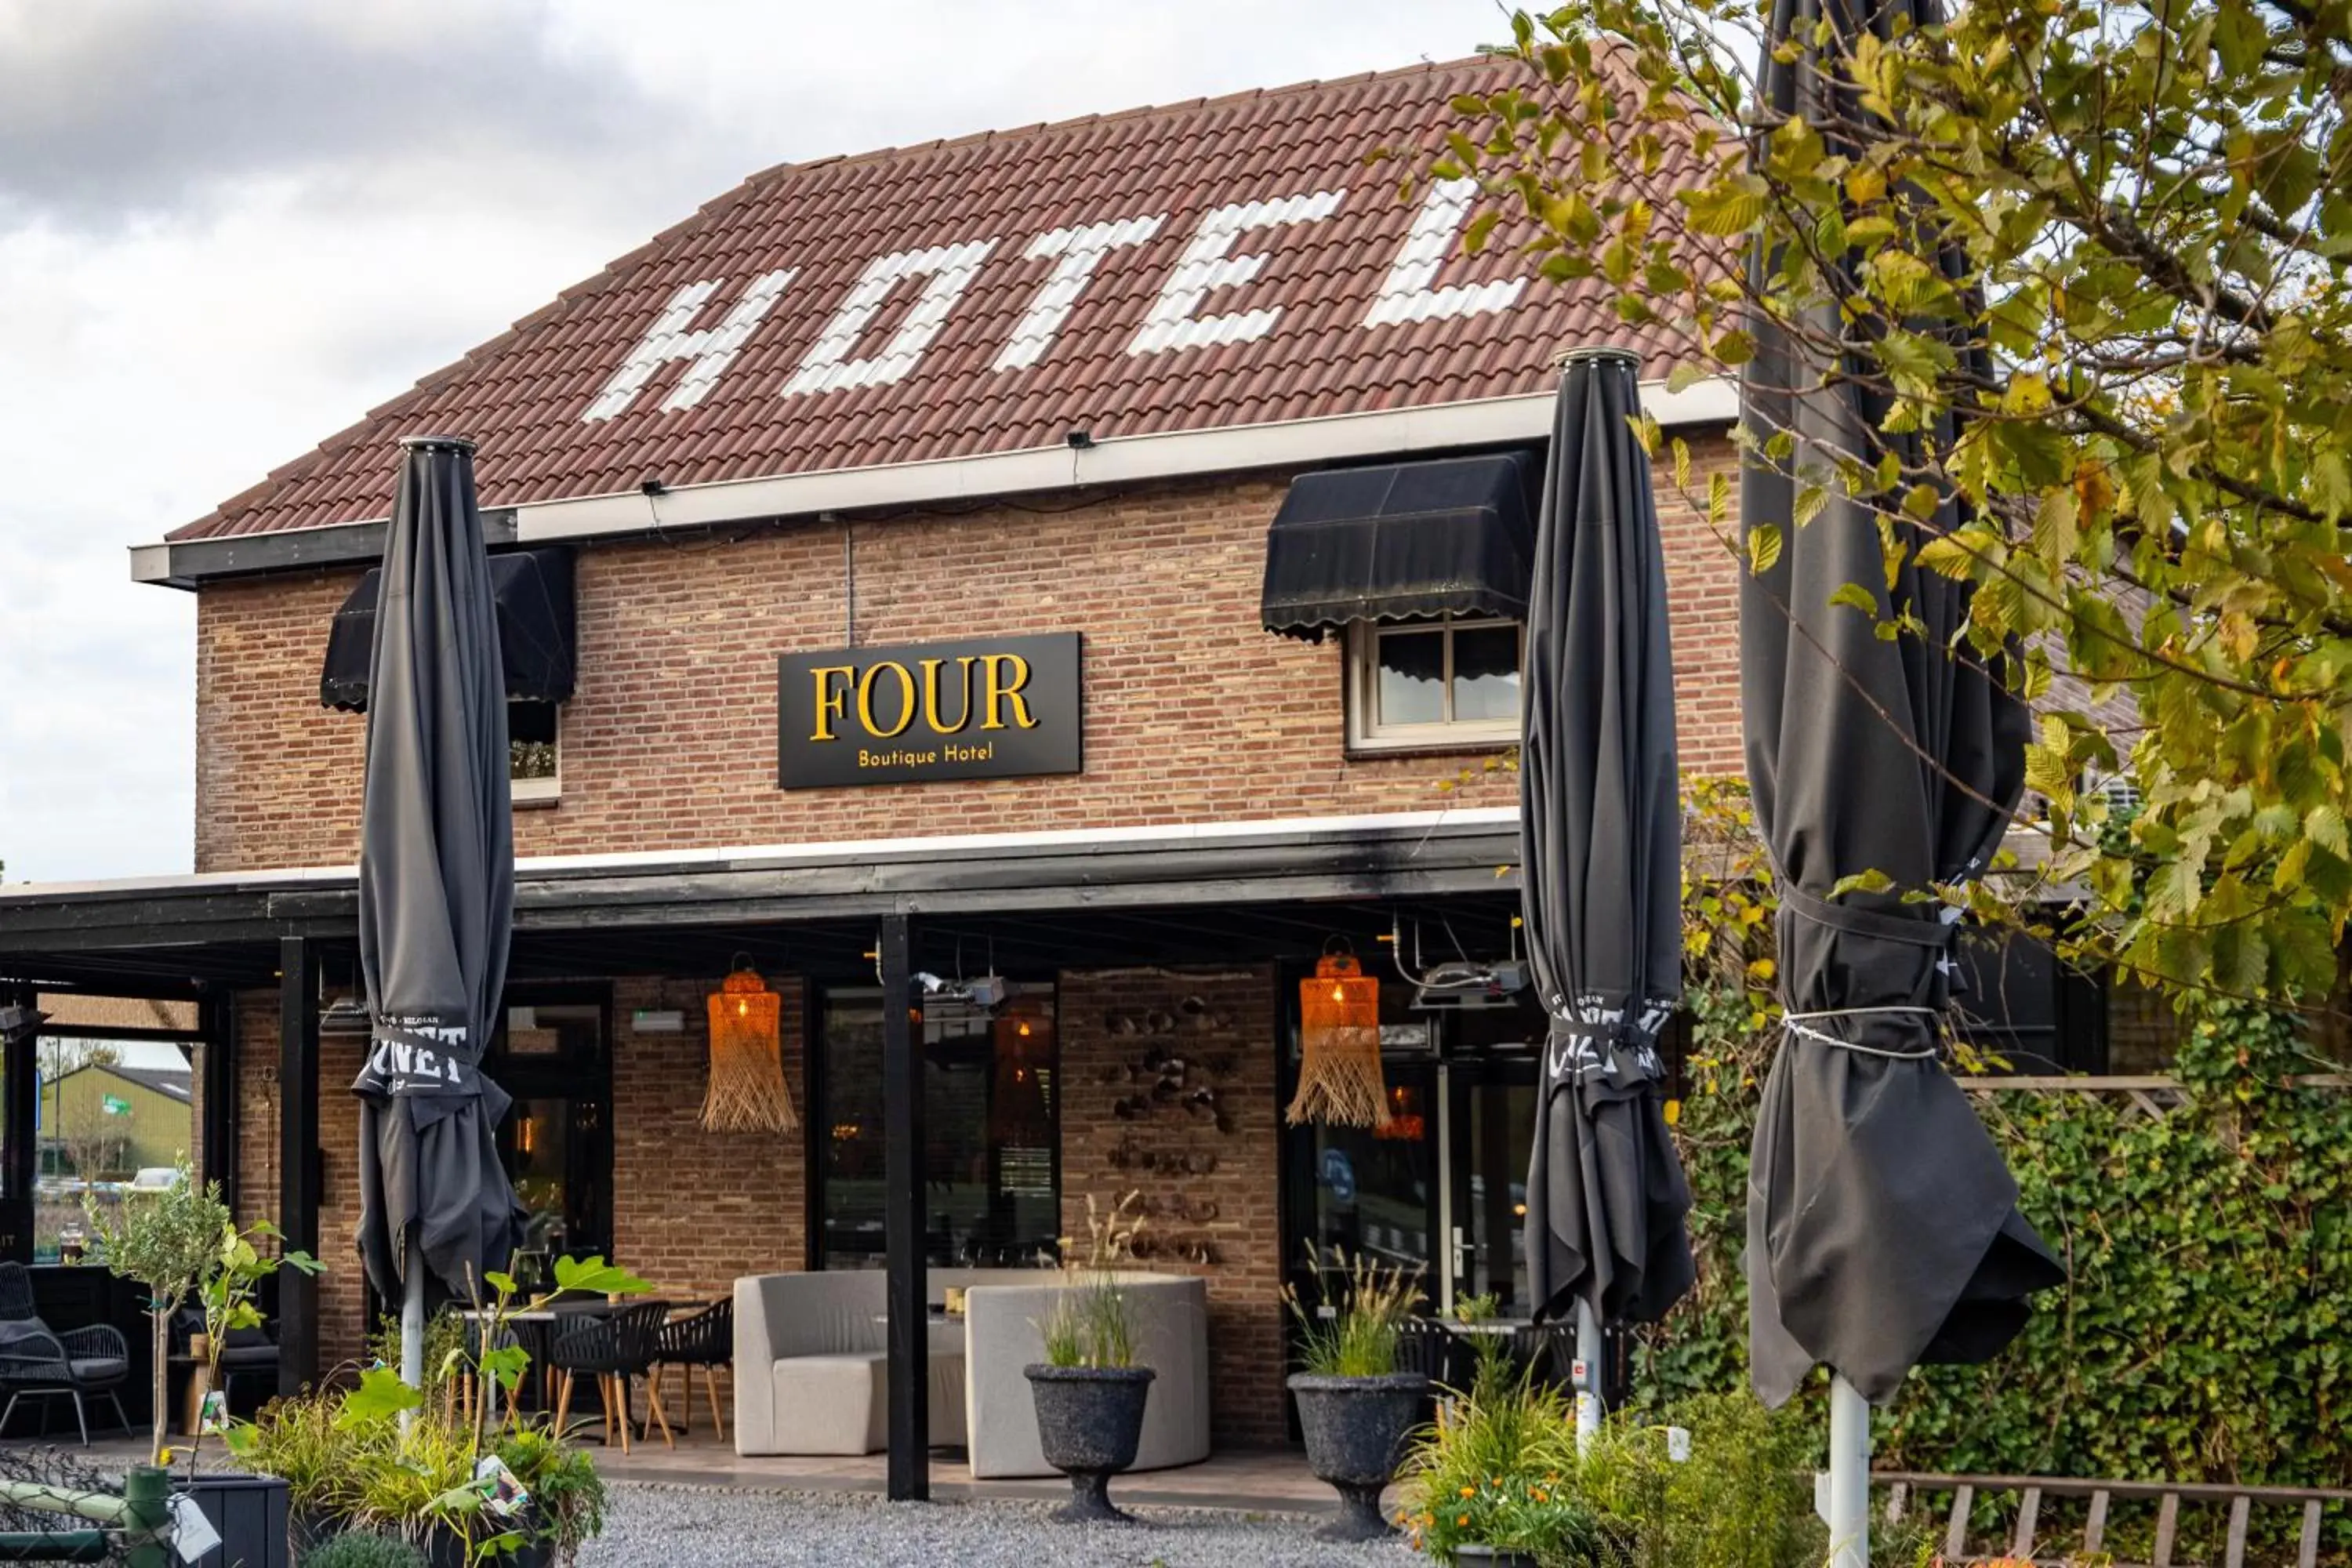 Property Building in Boutique Hotel Four